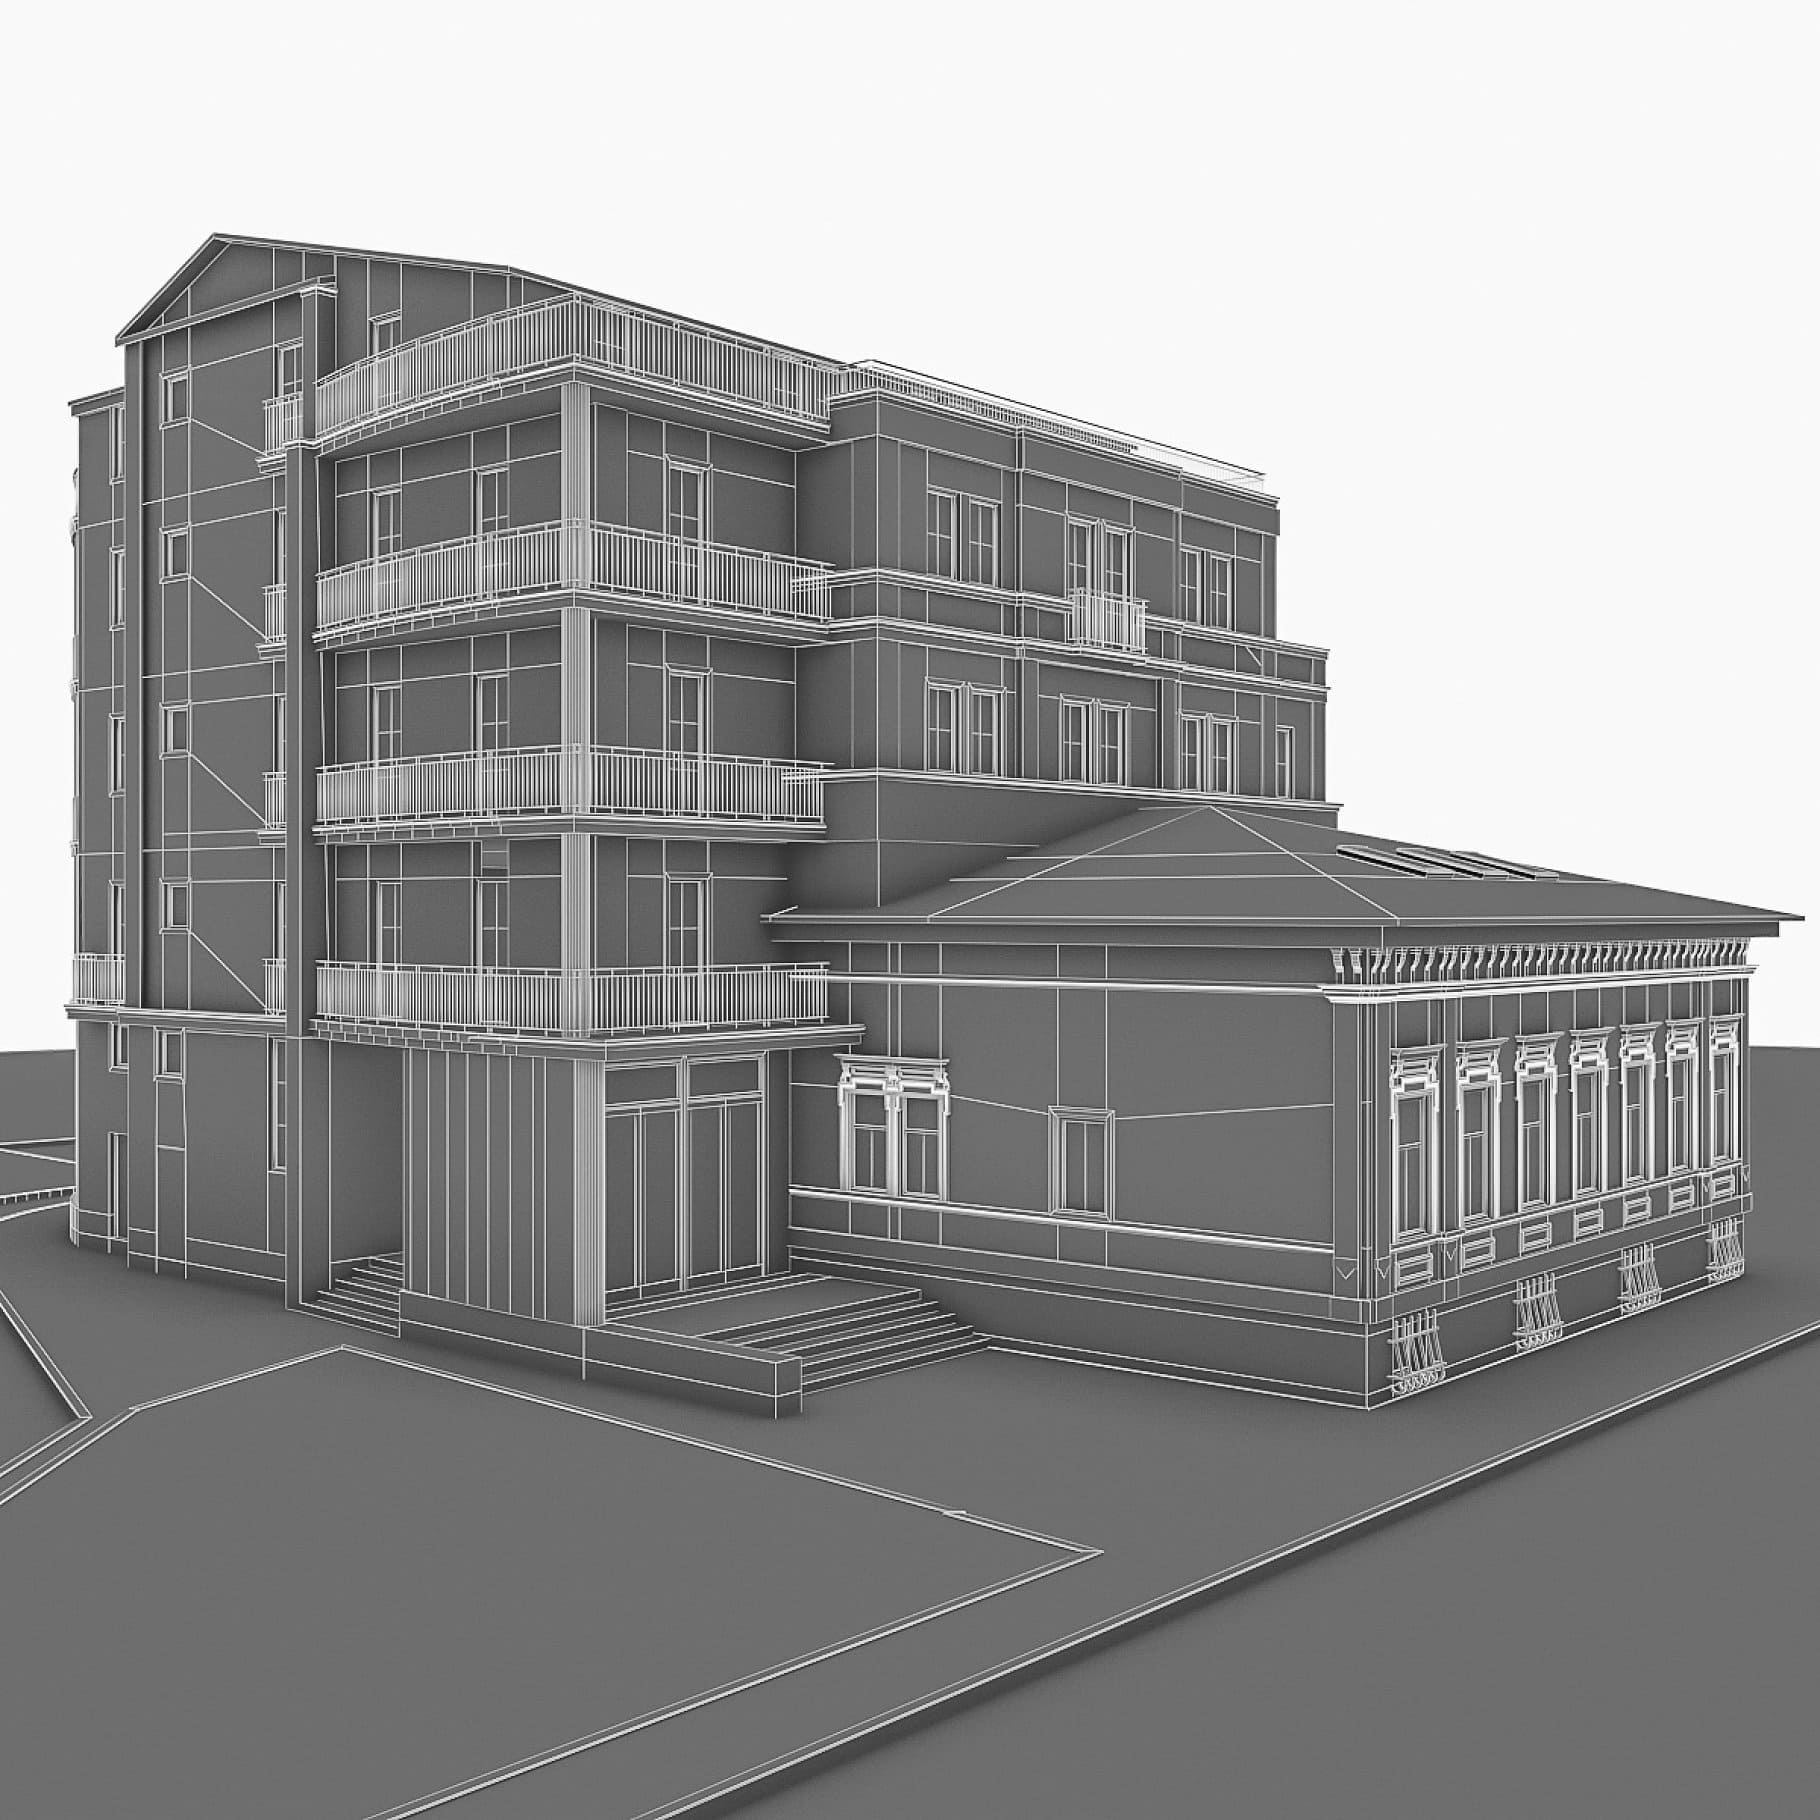 Five- and one-story buildings are drawn with lines, side view.